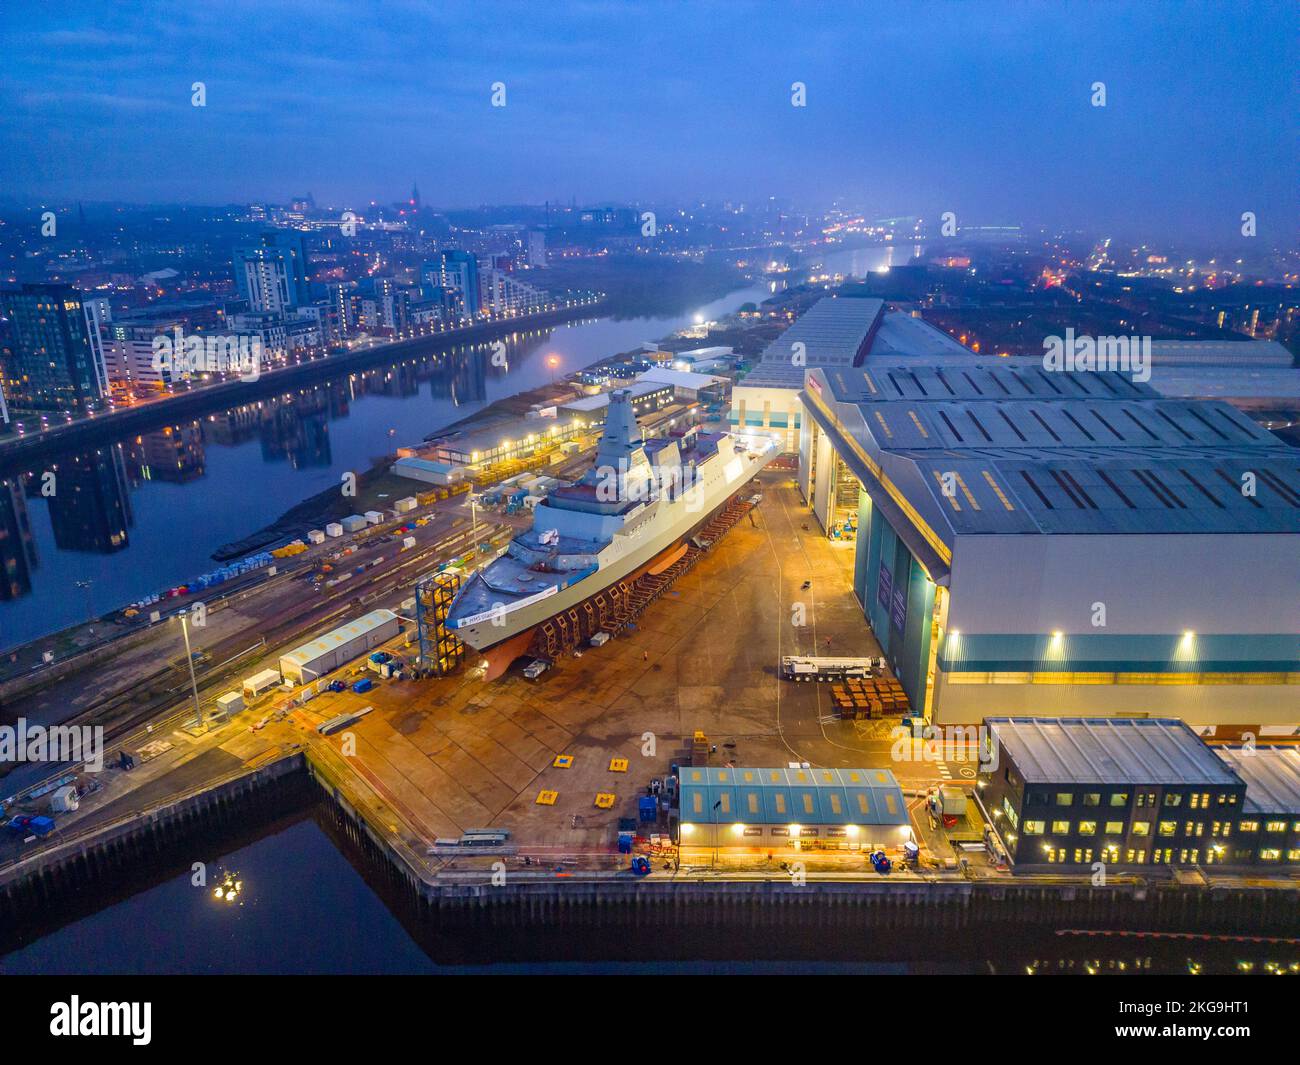 Glasgow, Scotland, UK. 22 November 2022. Aerial view of HMS Glasgow at BAE Systems Govan shipyard  just before being transferred by barge to nearby Scotstoun shipyard on the River Clyde. The ship is a Type 26 anti-submarine frigate.  Iain Masterton/Alamy Live News Stock Photo